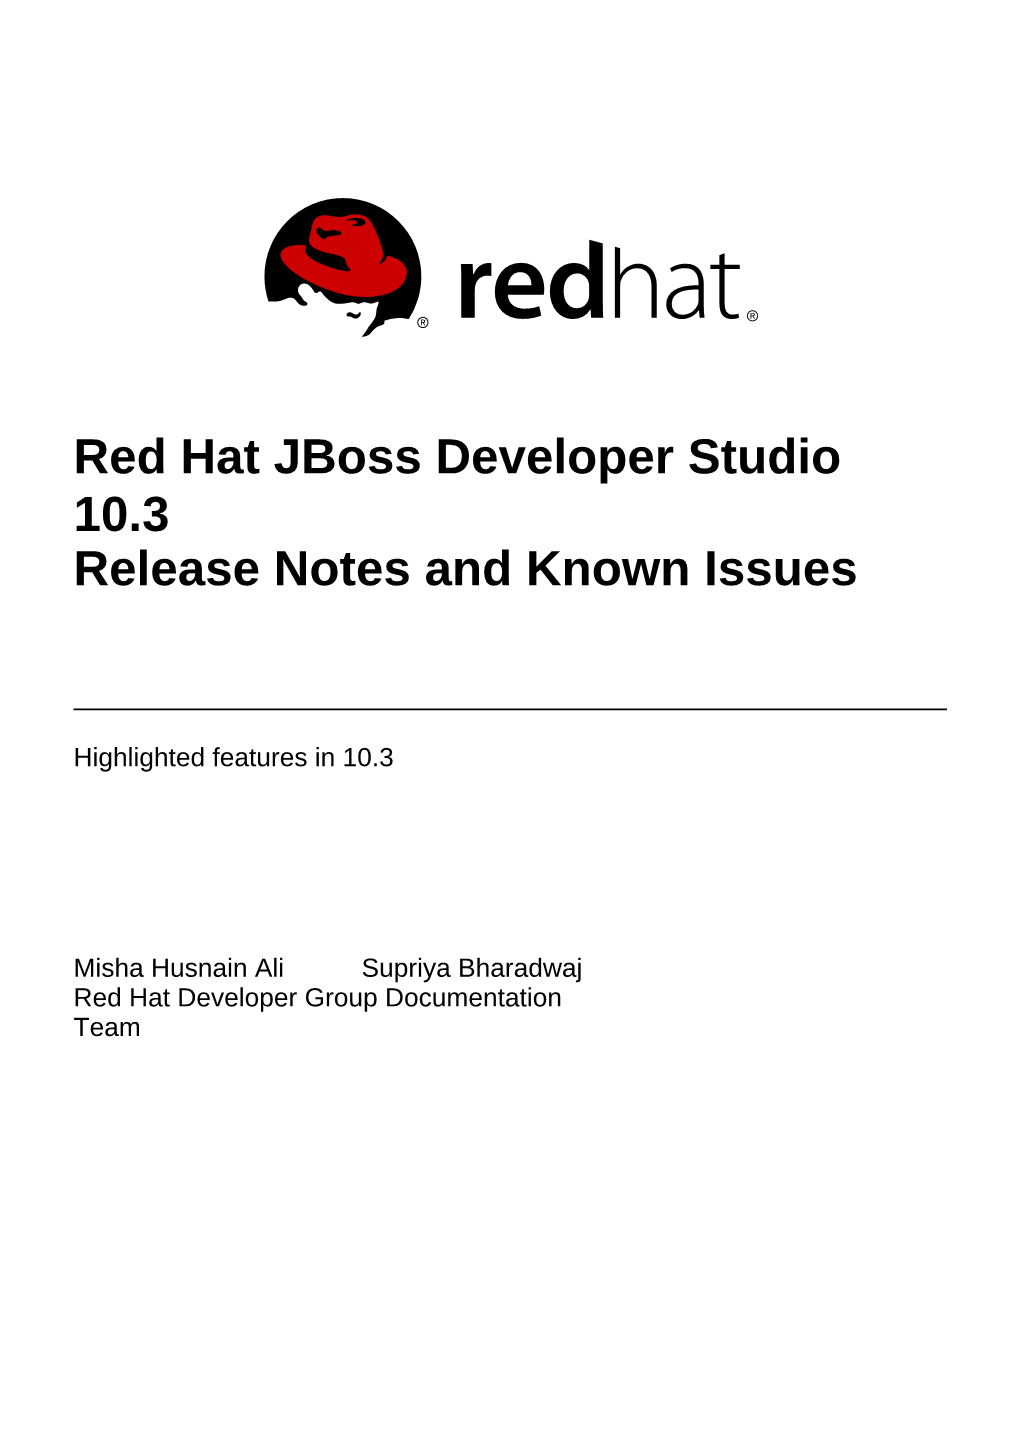 Red Hat Jboss Developer Studio 10.3 Release Notes and Known Issues